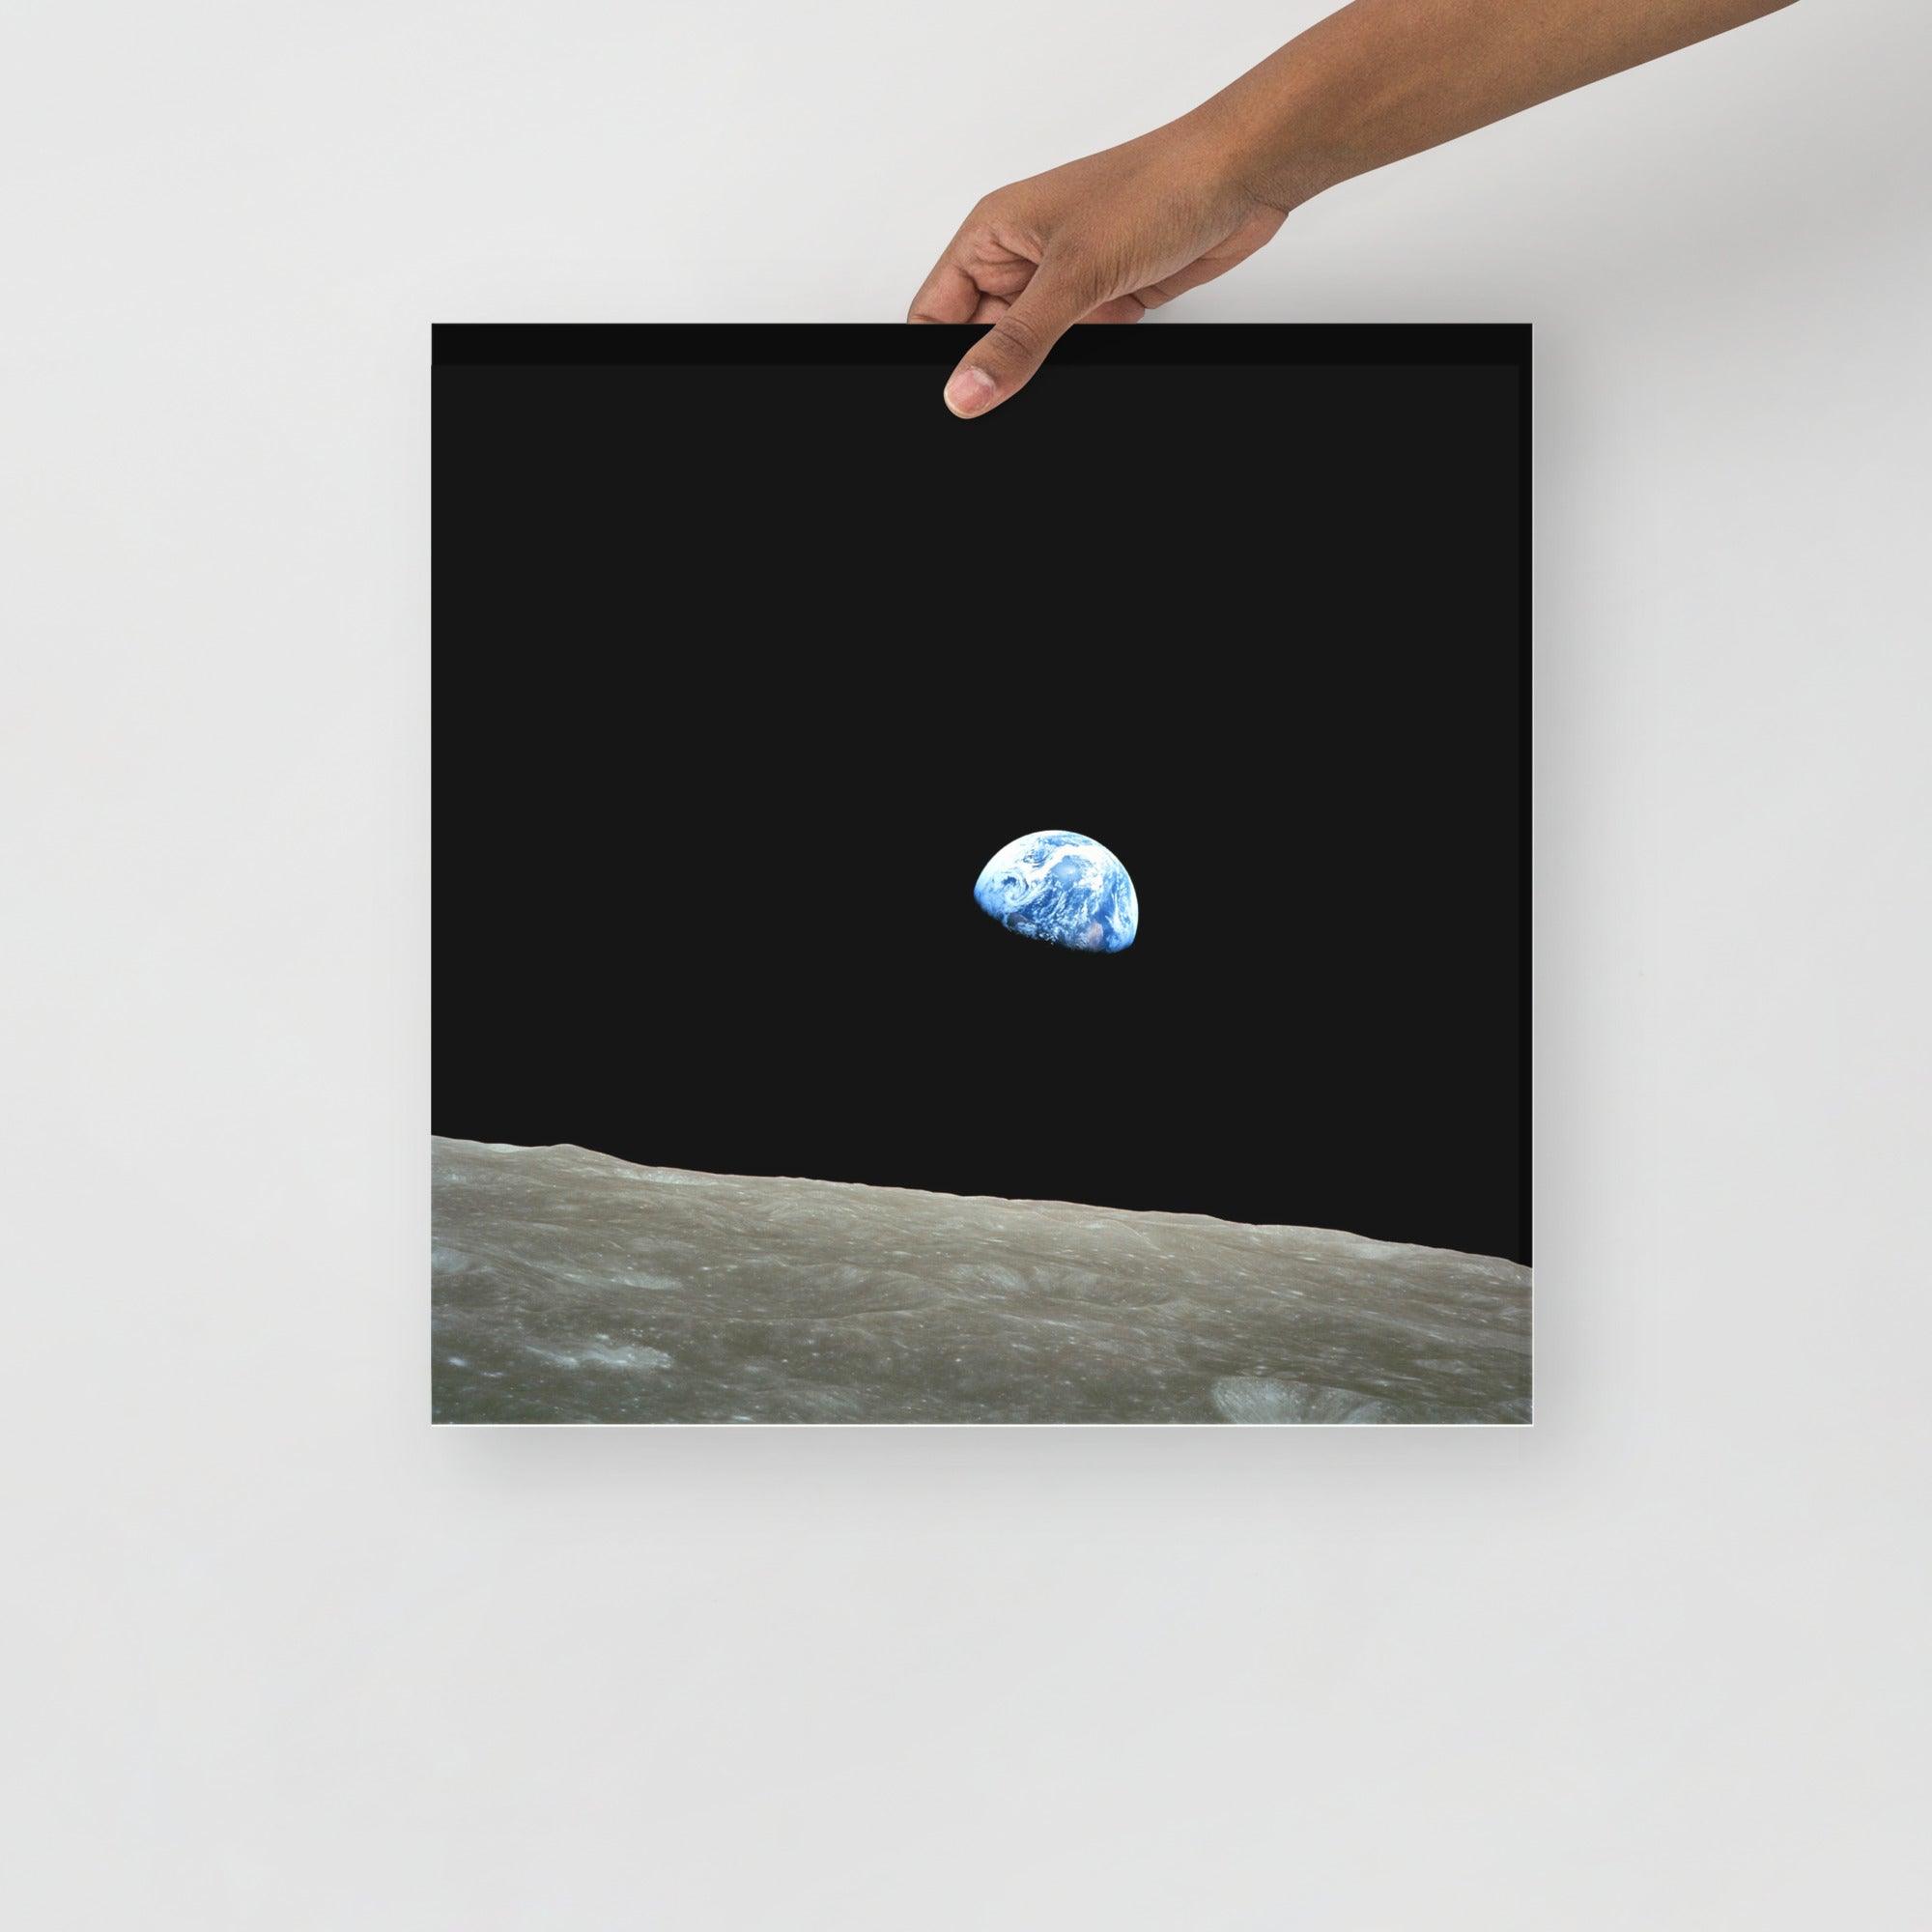 An Earthrise Apollo 8 poster on a plain backdrop in size 16x16”.